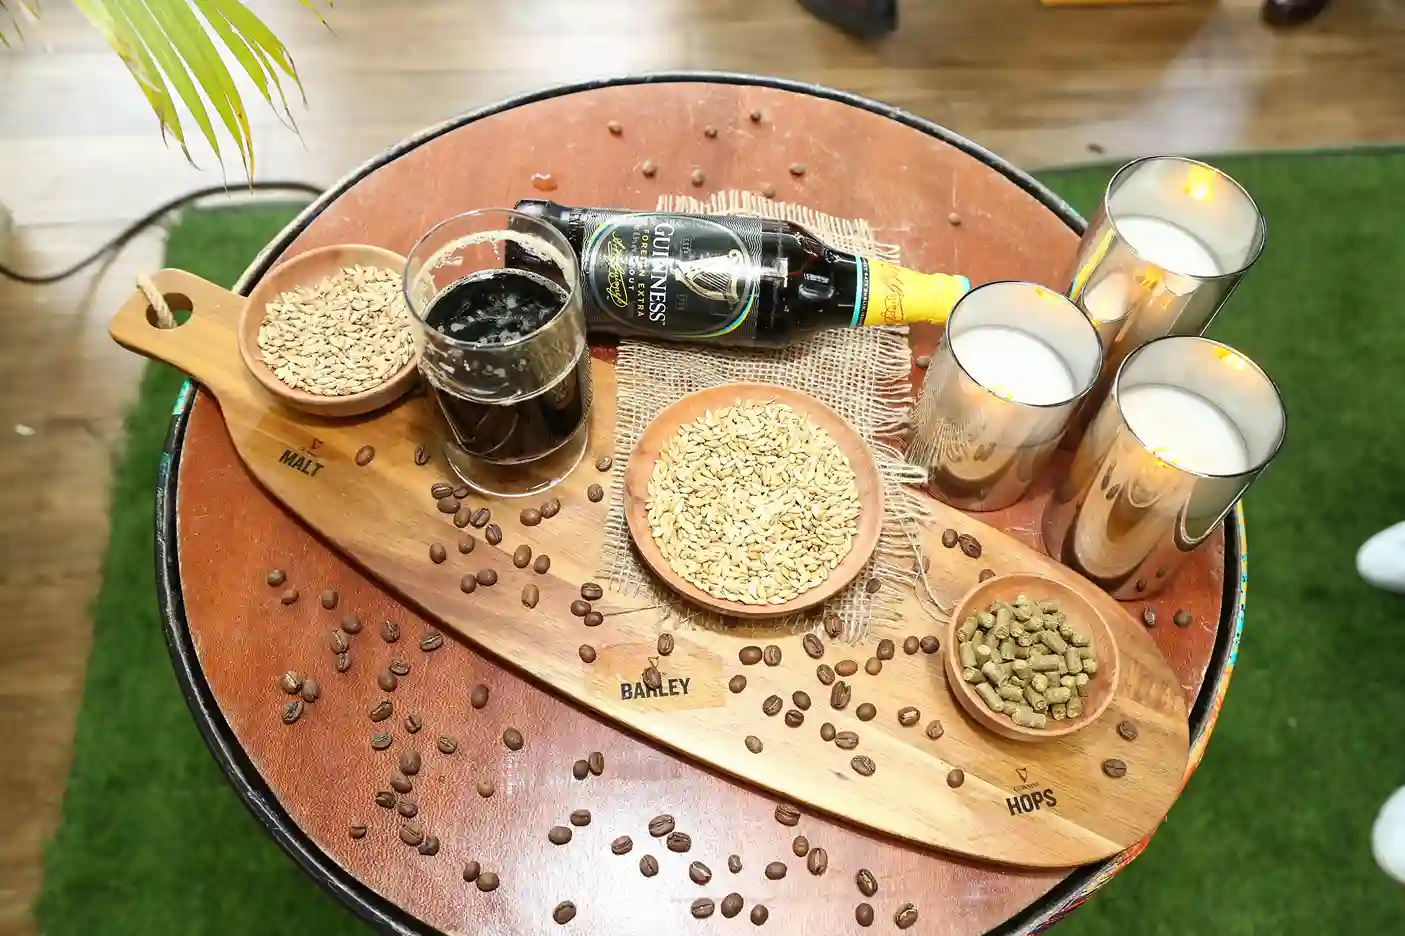 A display of Guiness stout ingredients during the Beer Festival held at Nairobi Street Kitchen on the 8th – 9th July.